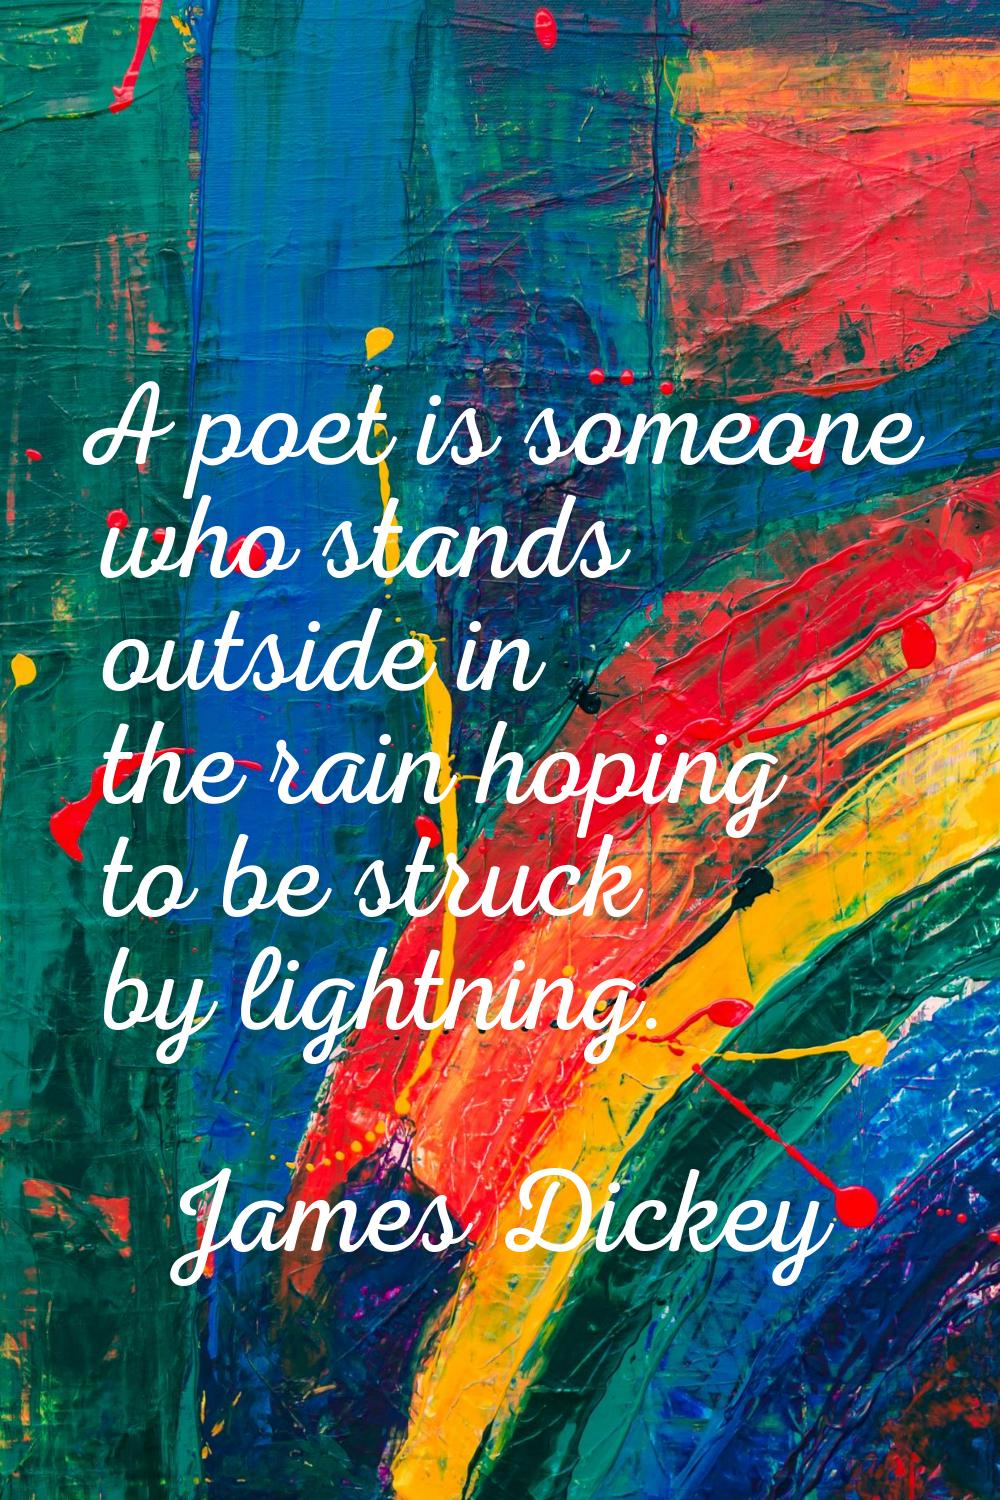 A poet is someone who stands outside in the rain hoping to be struck by lightning.